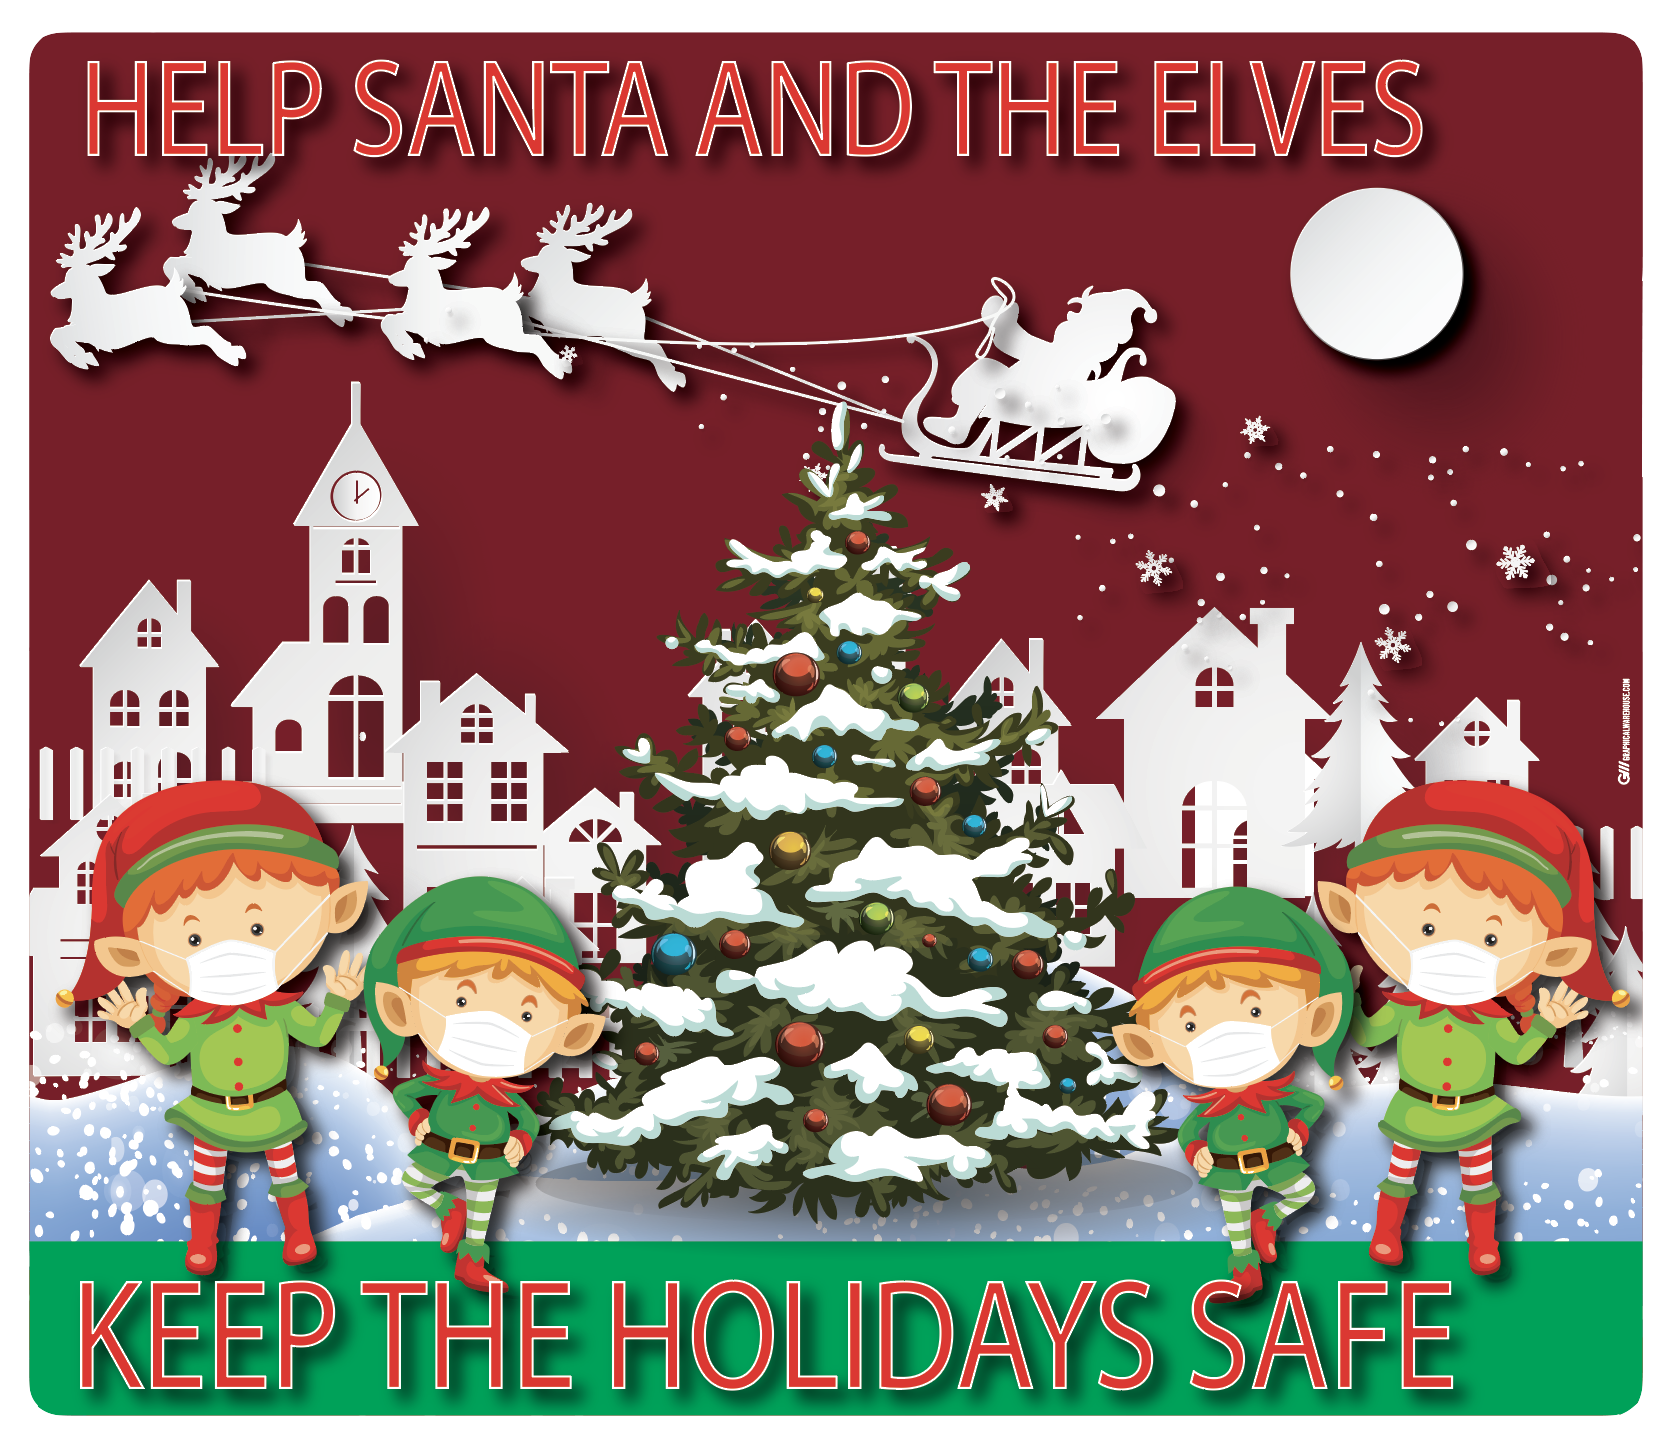 "Keep Santa, Elves, and the Holidays Safe" Adhesive Durable Vinyl Decal- Various Sizes Available